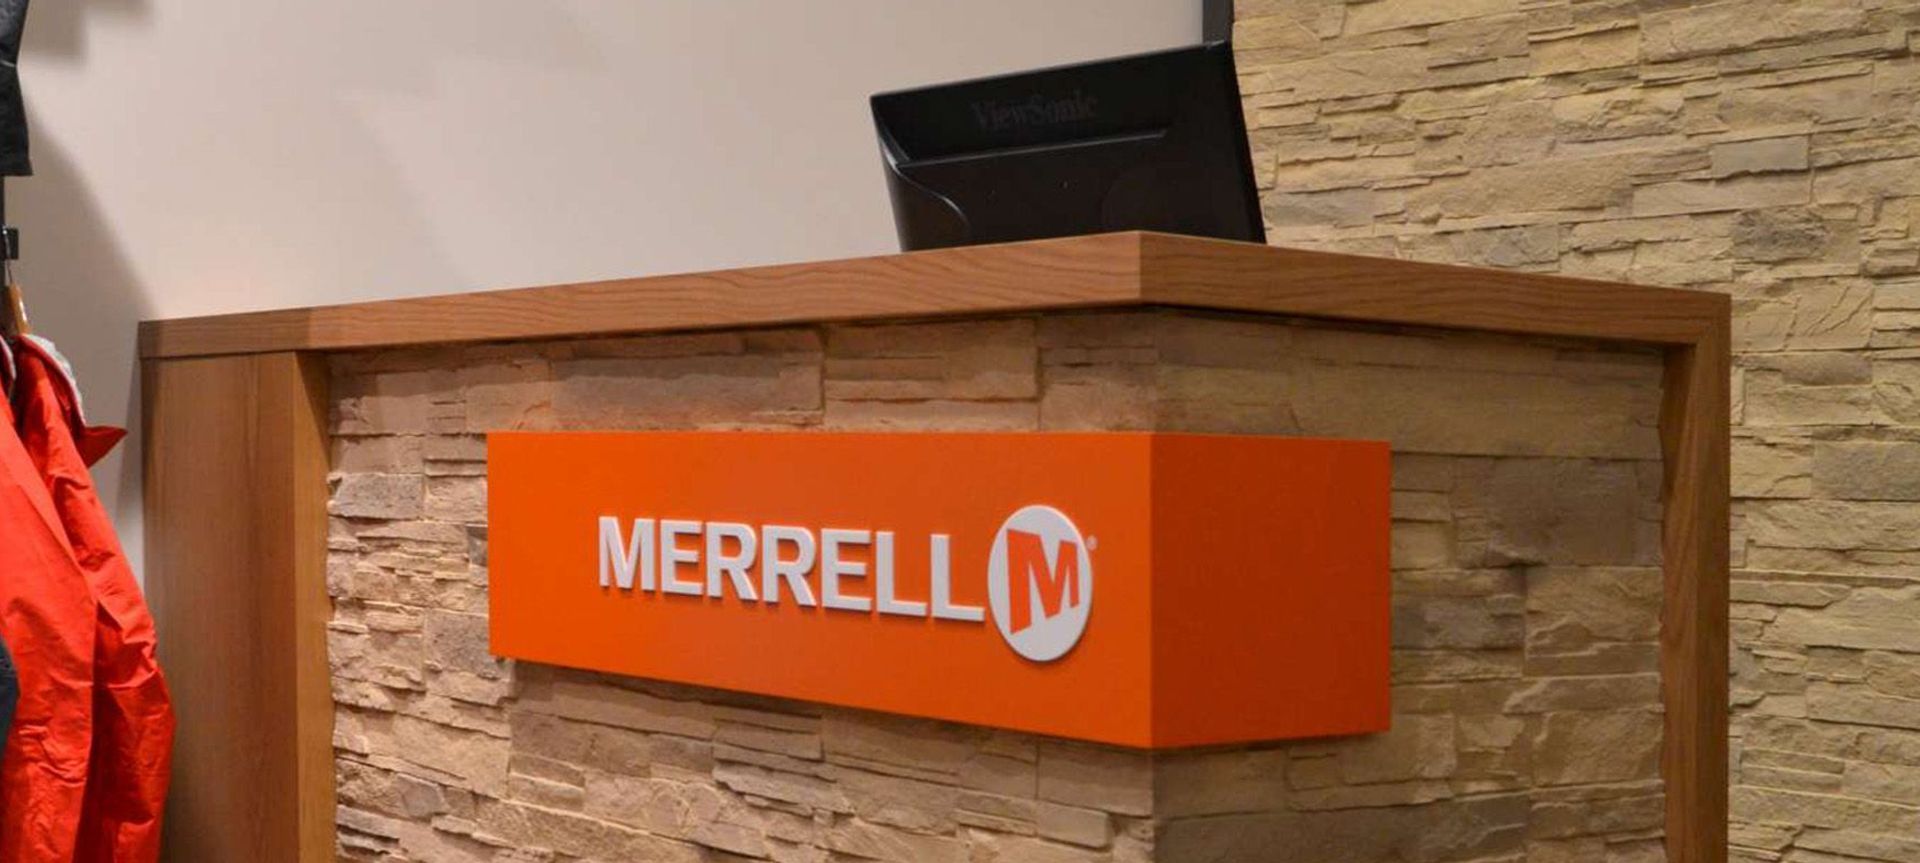 Merrell Retail Fit-Out banner